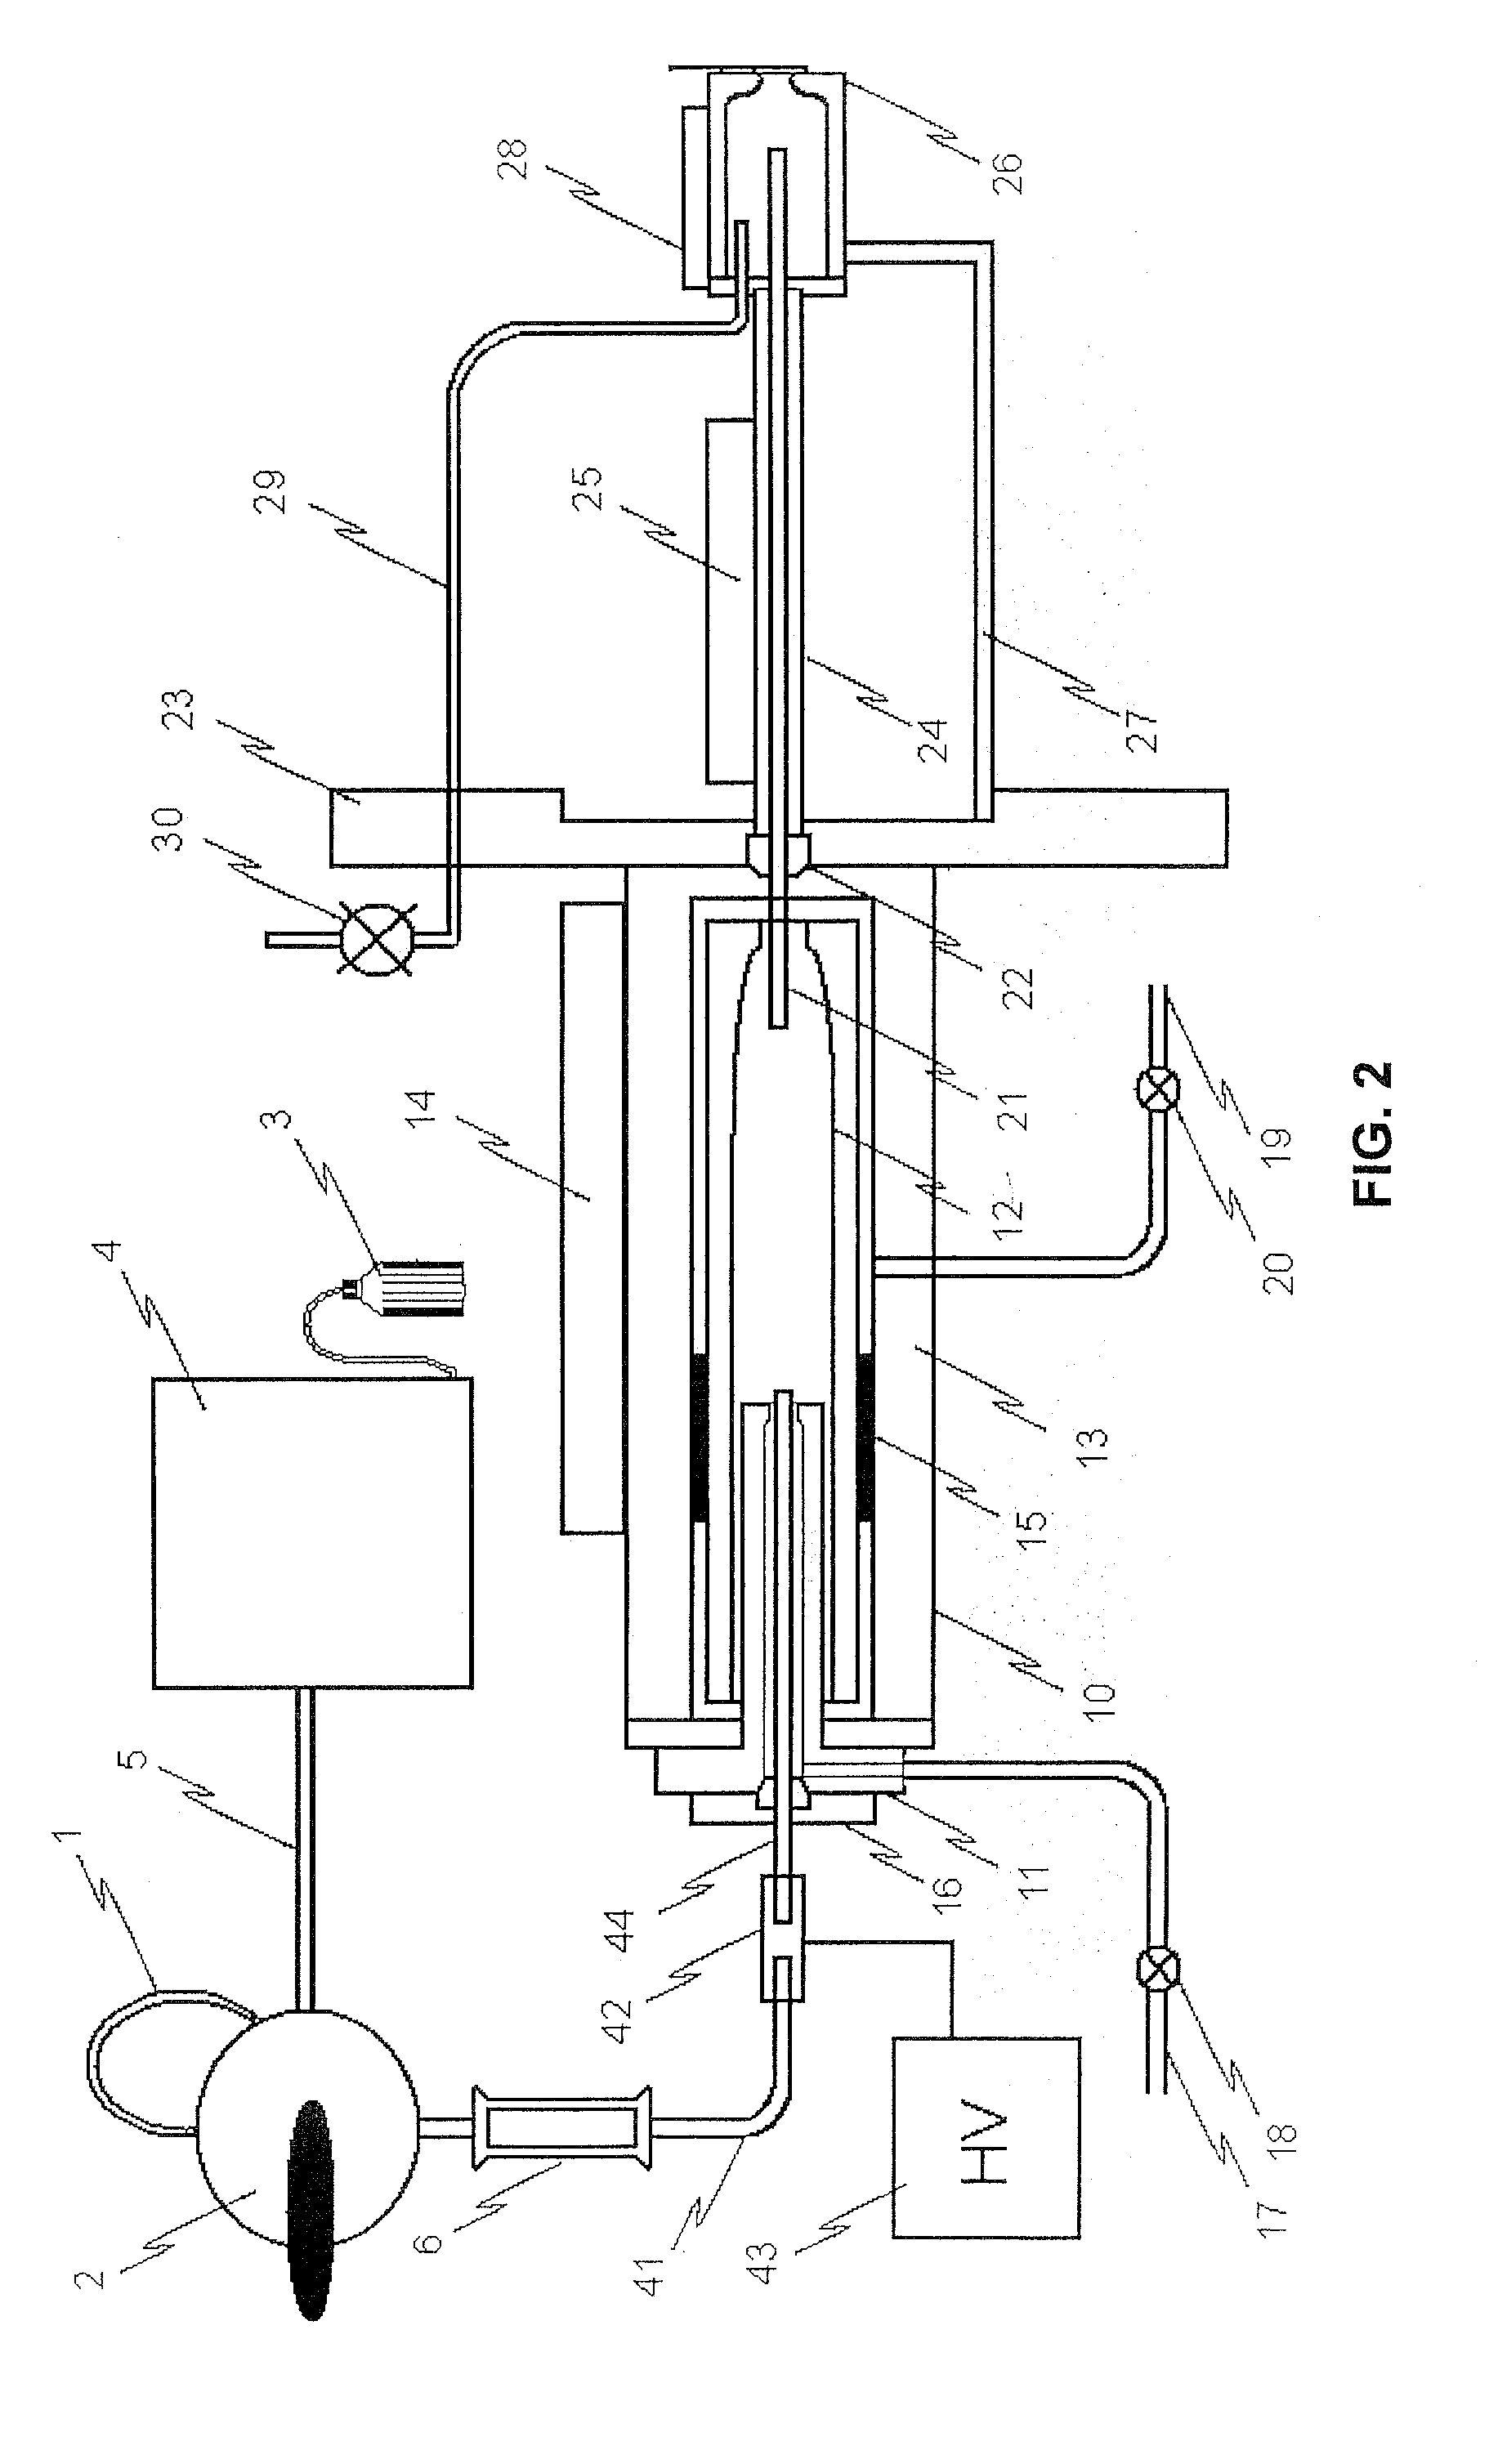 Capillary separated vaporization chamber and nozzle device and method